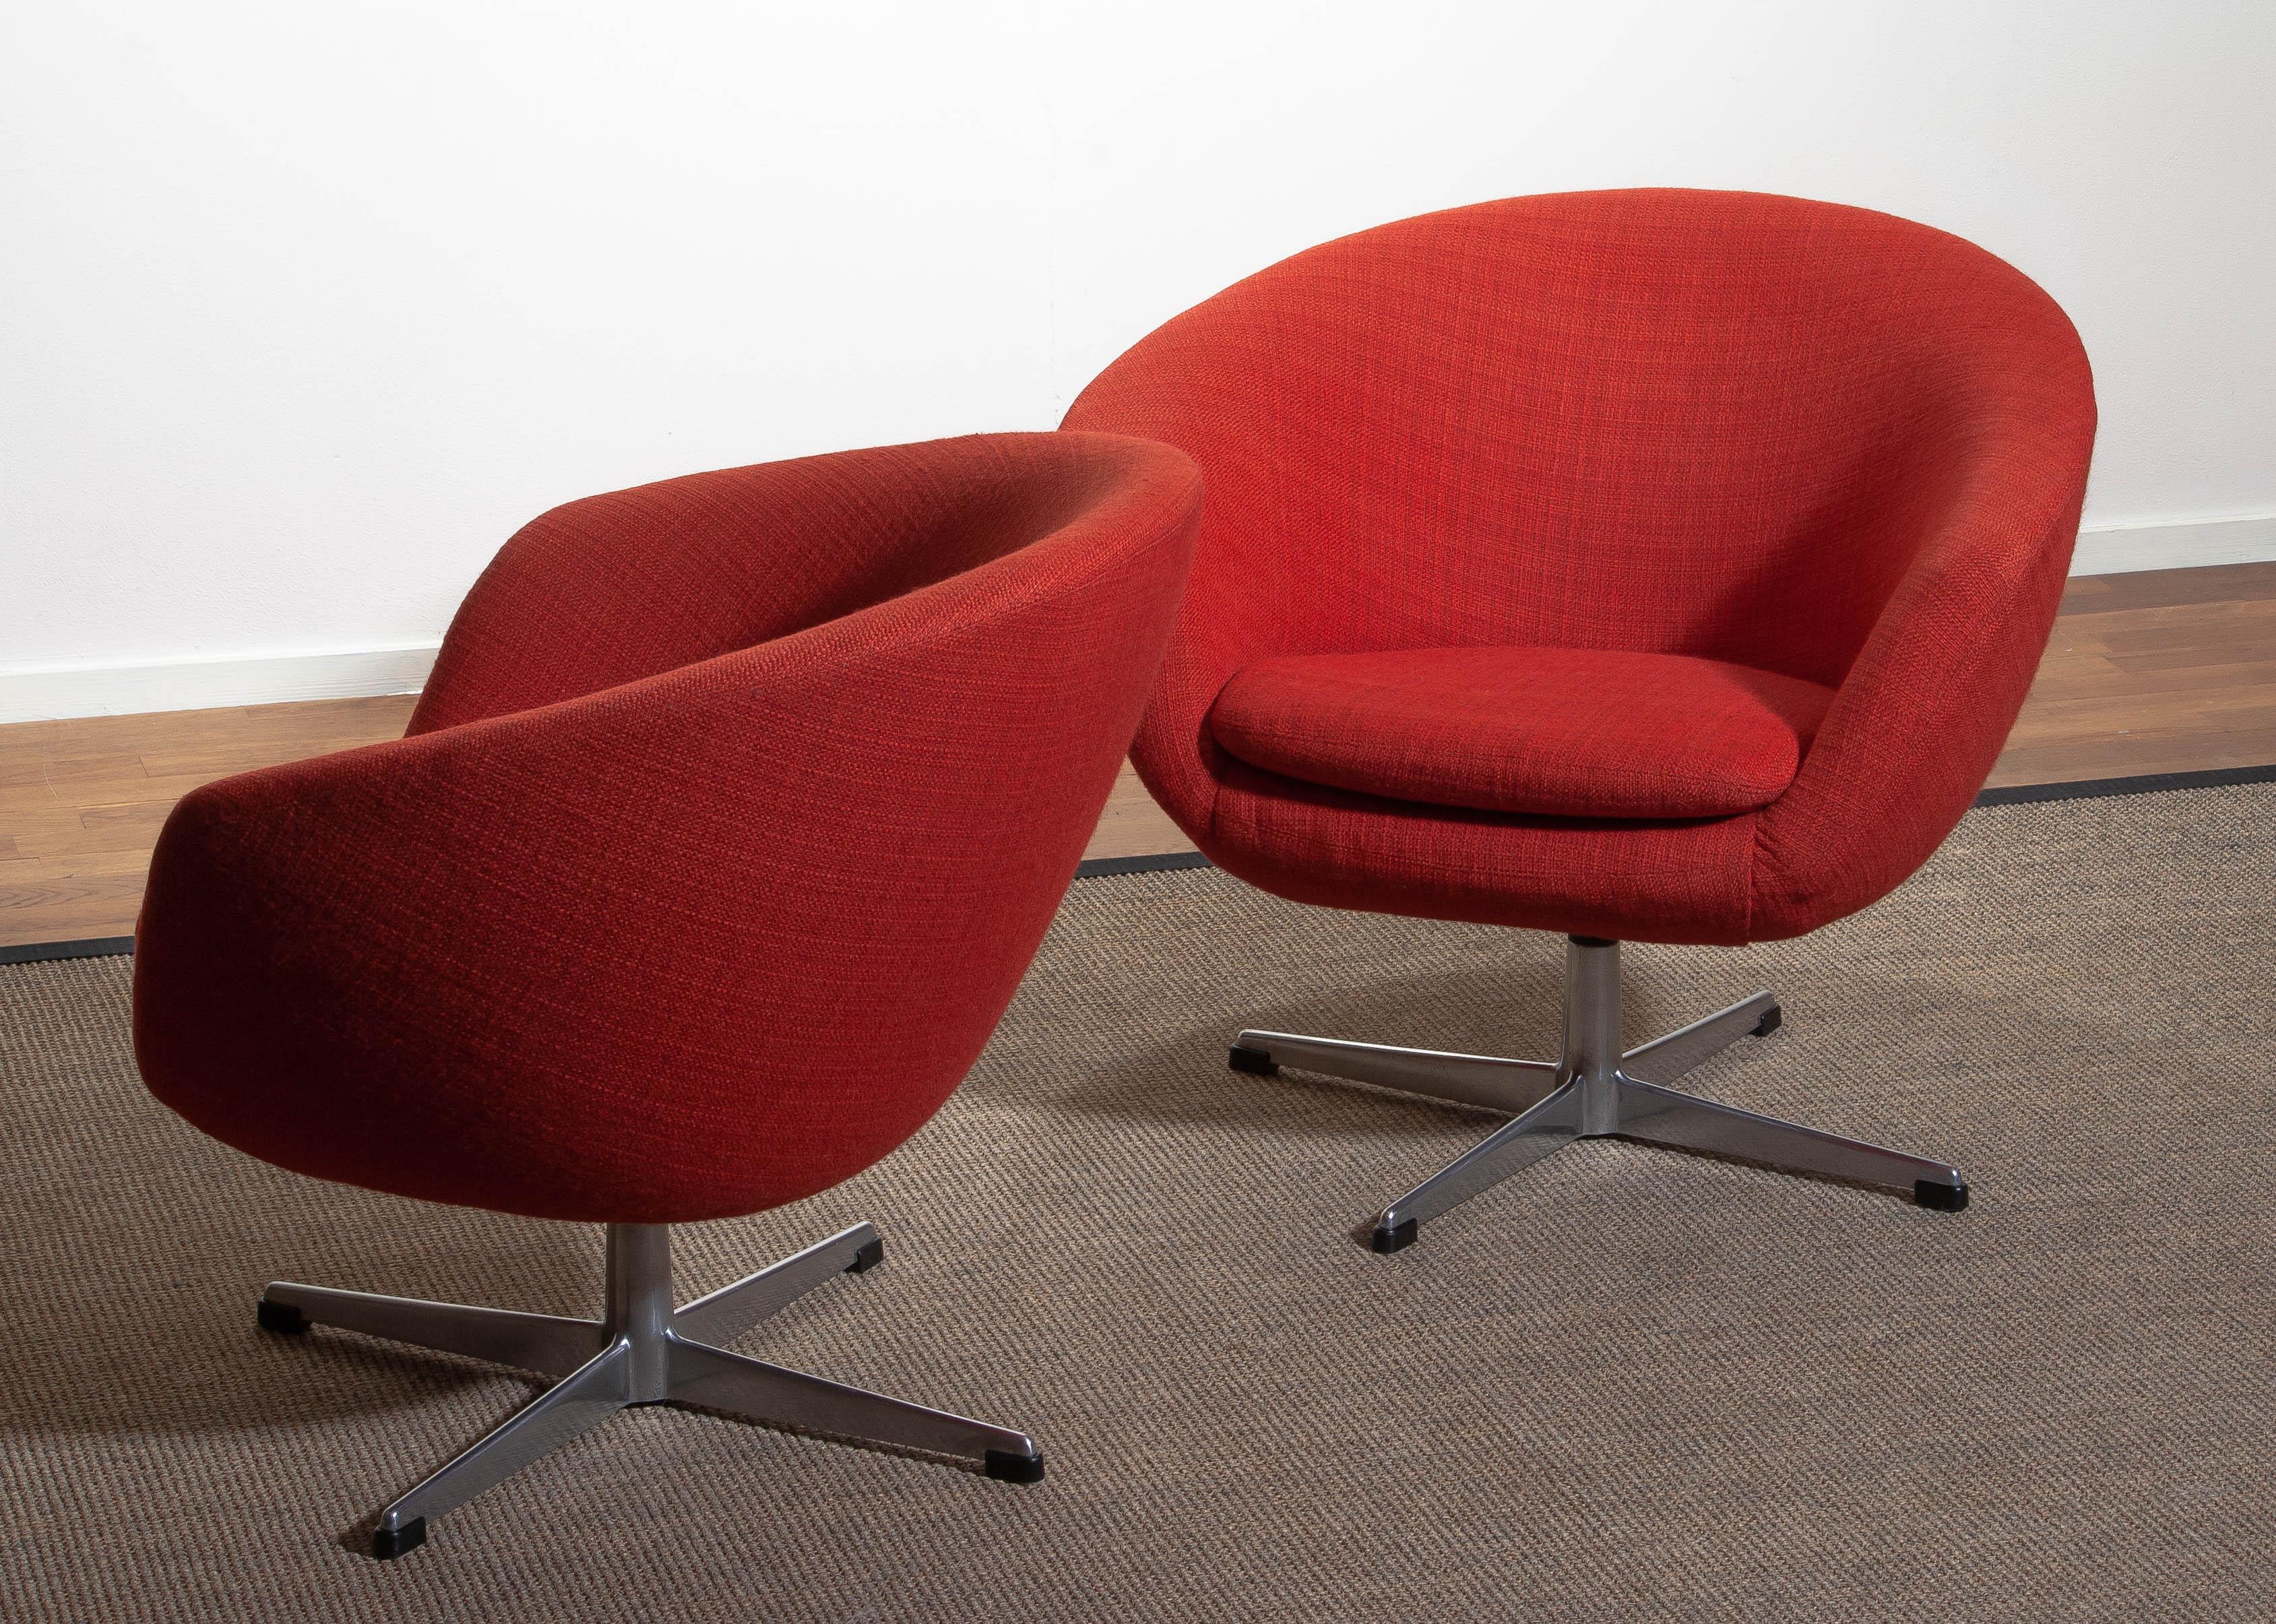 1960s, Pair of Swivel Lounge Chairs by Carl Eric Klote for Overman, Denmark In Good Condition In Silvolde, Gelderland